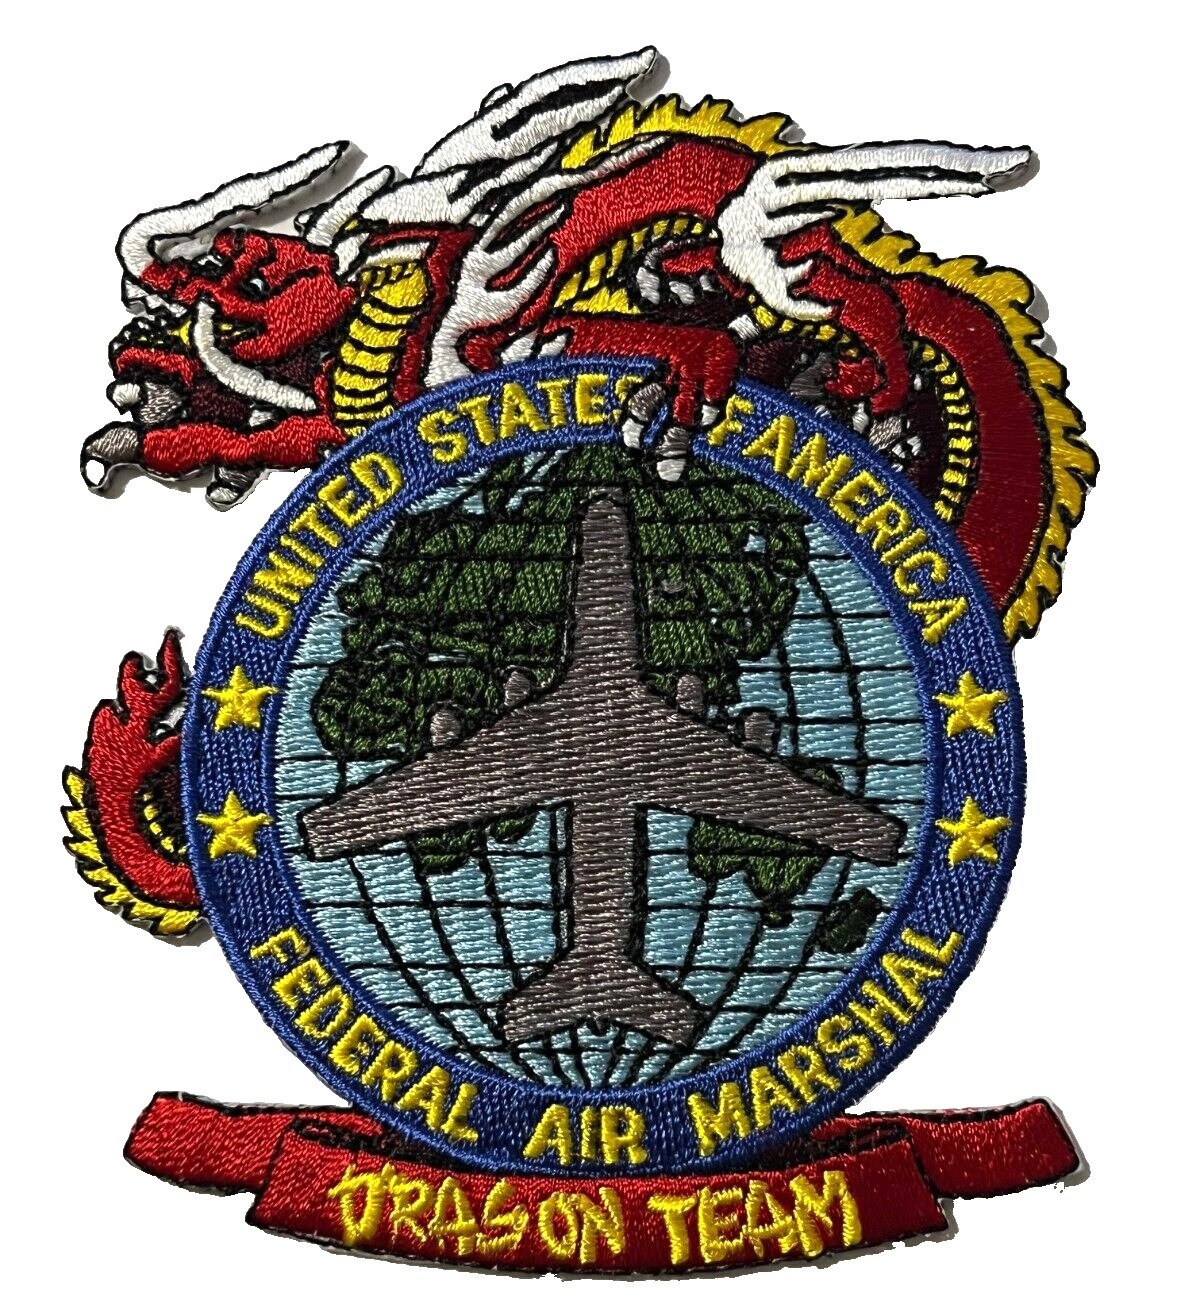 US FEDERAL AIR MARSHAL DRAGON TEAM PATCH (PD11) SSI